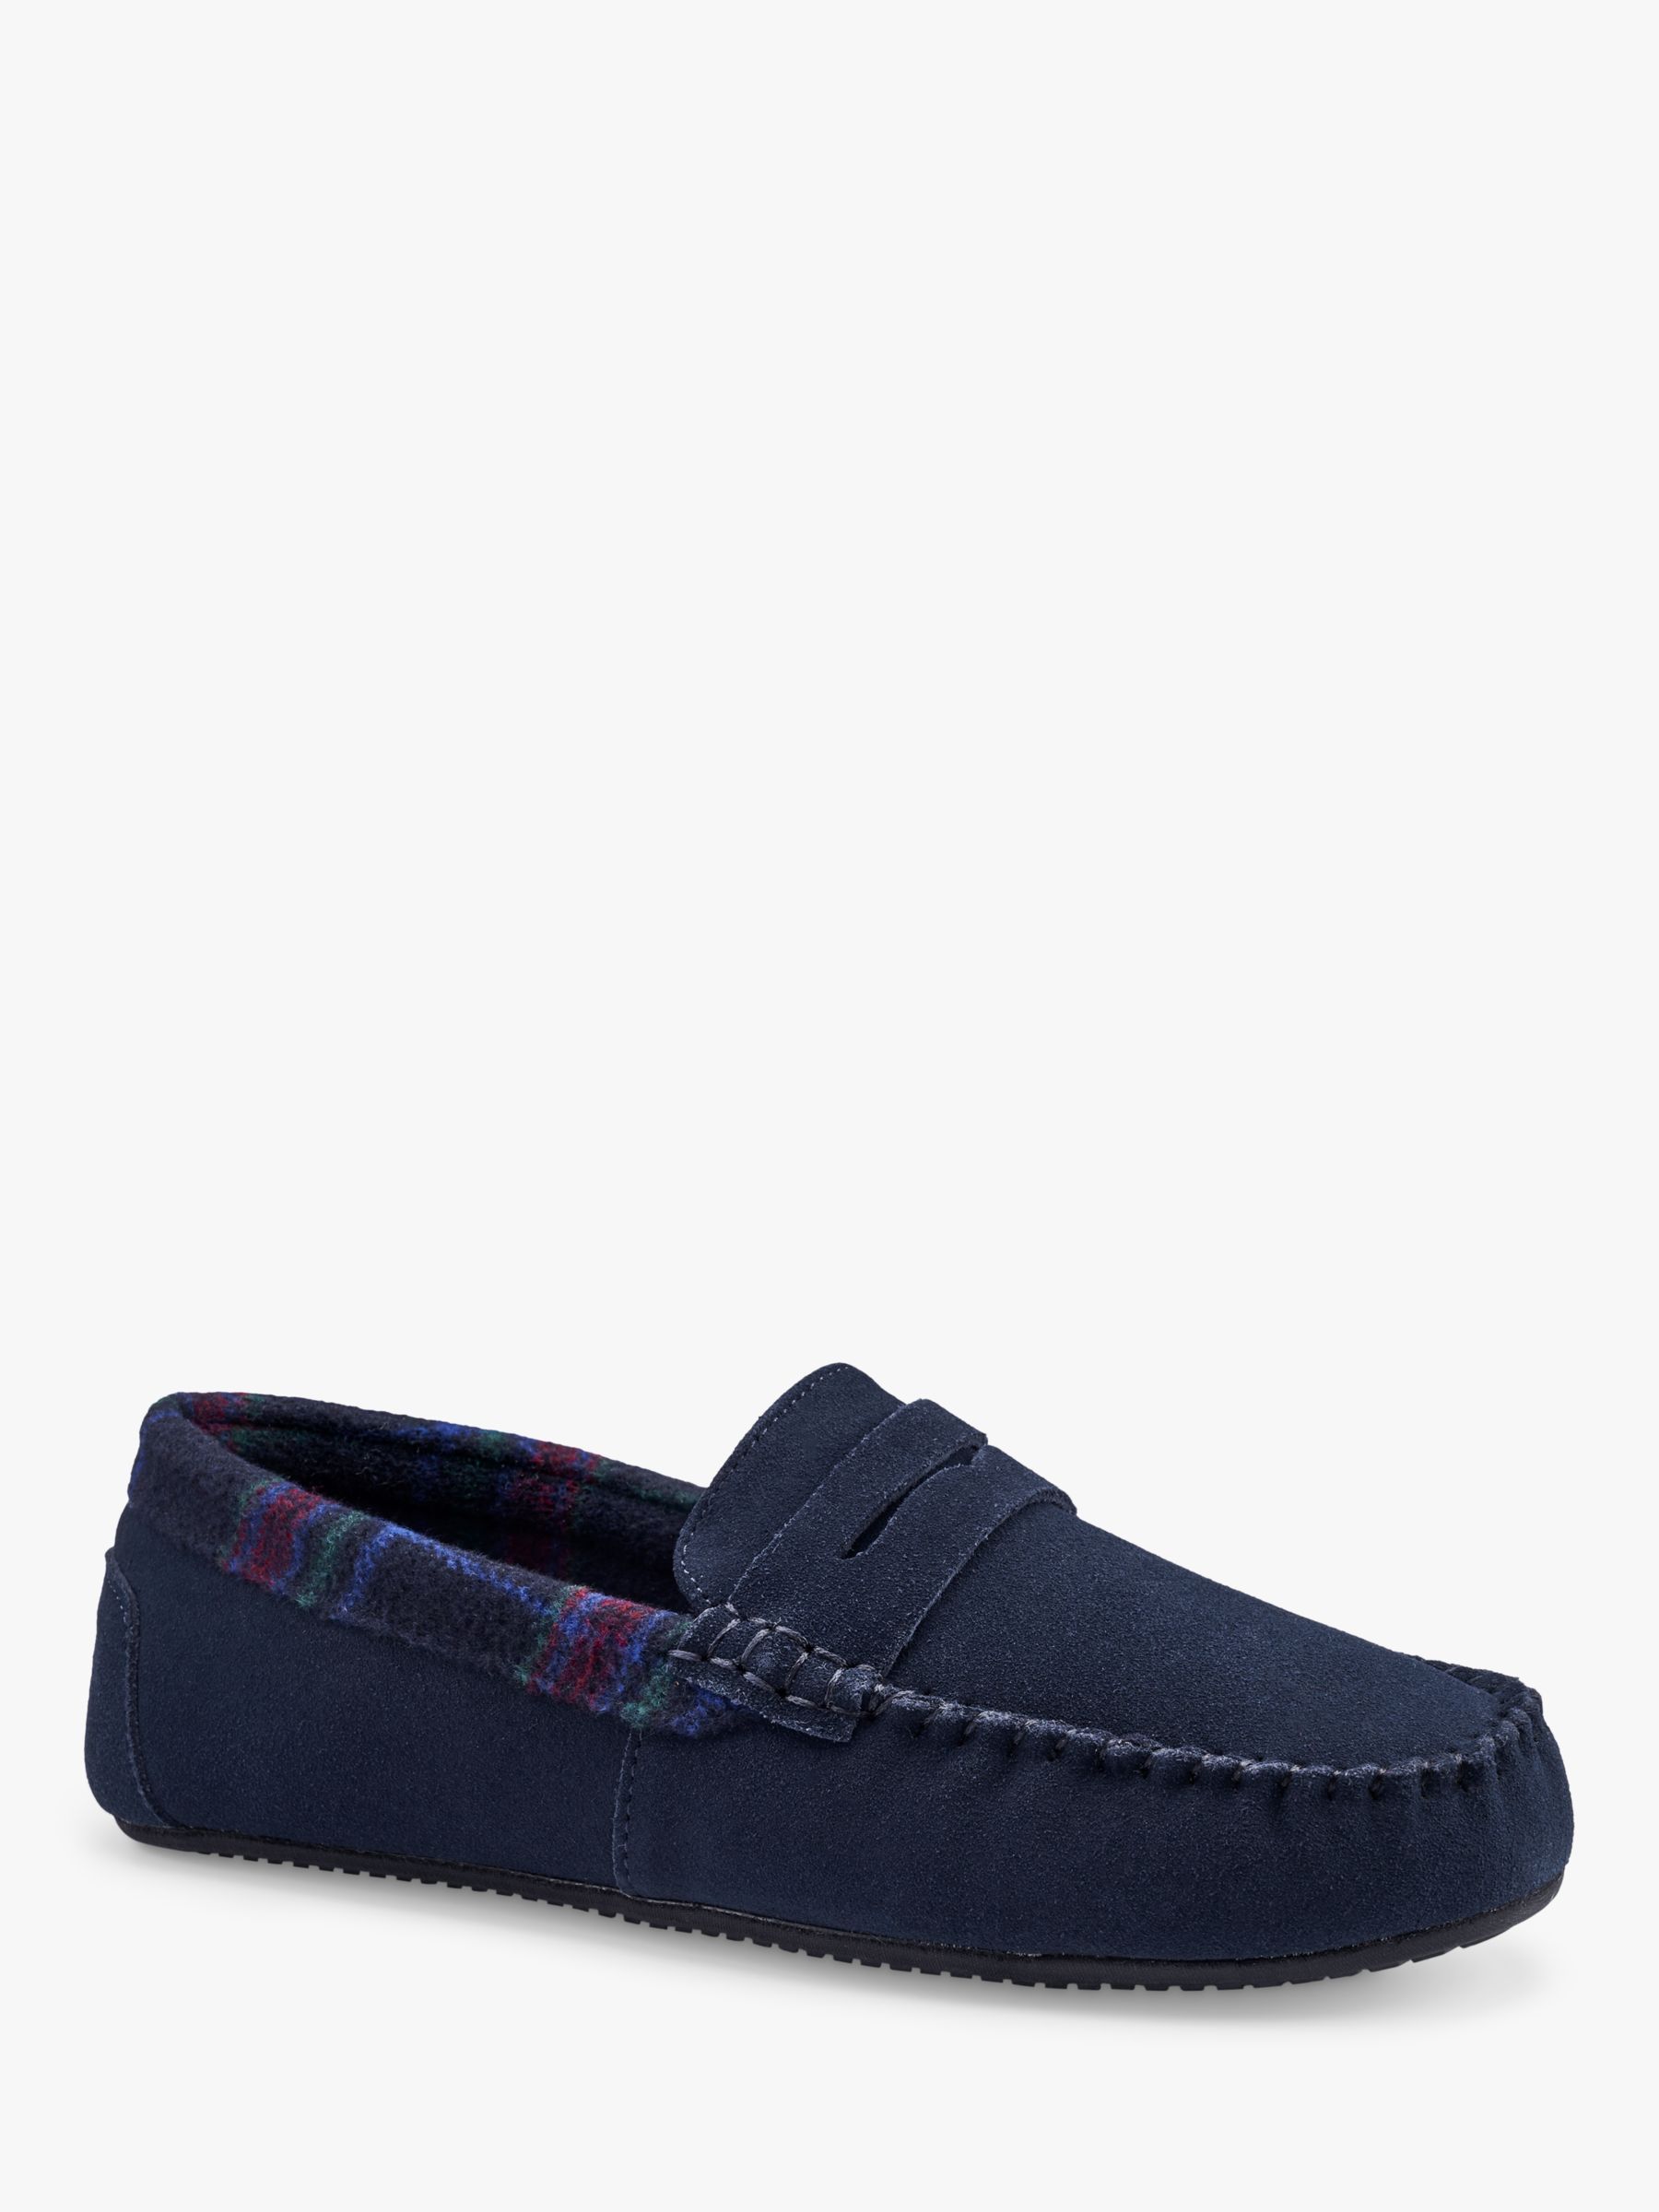 Hotter Repose Moccasin Slippers, Navy, 6